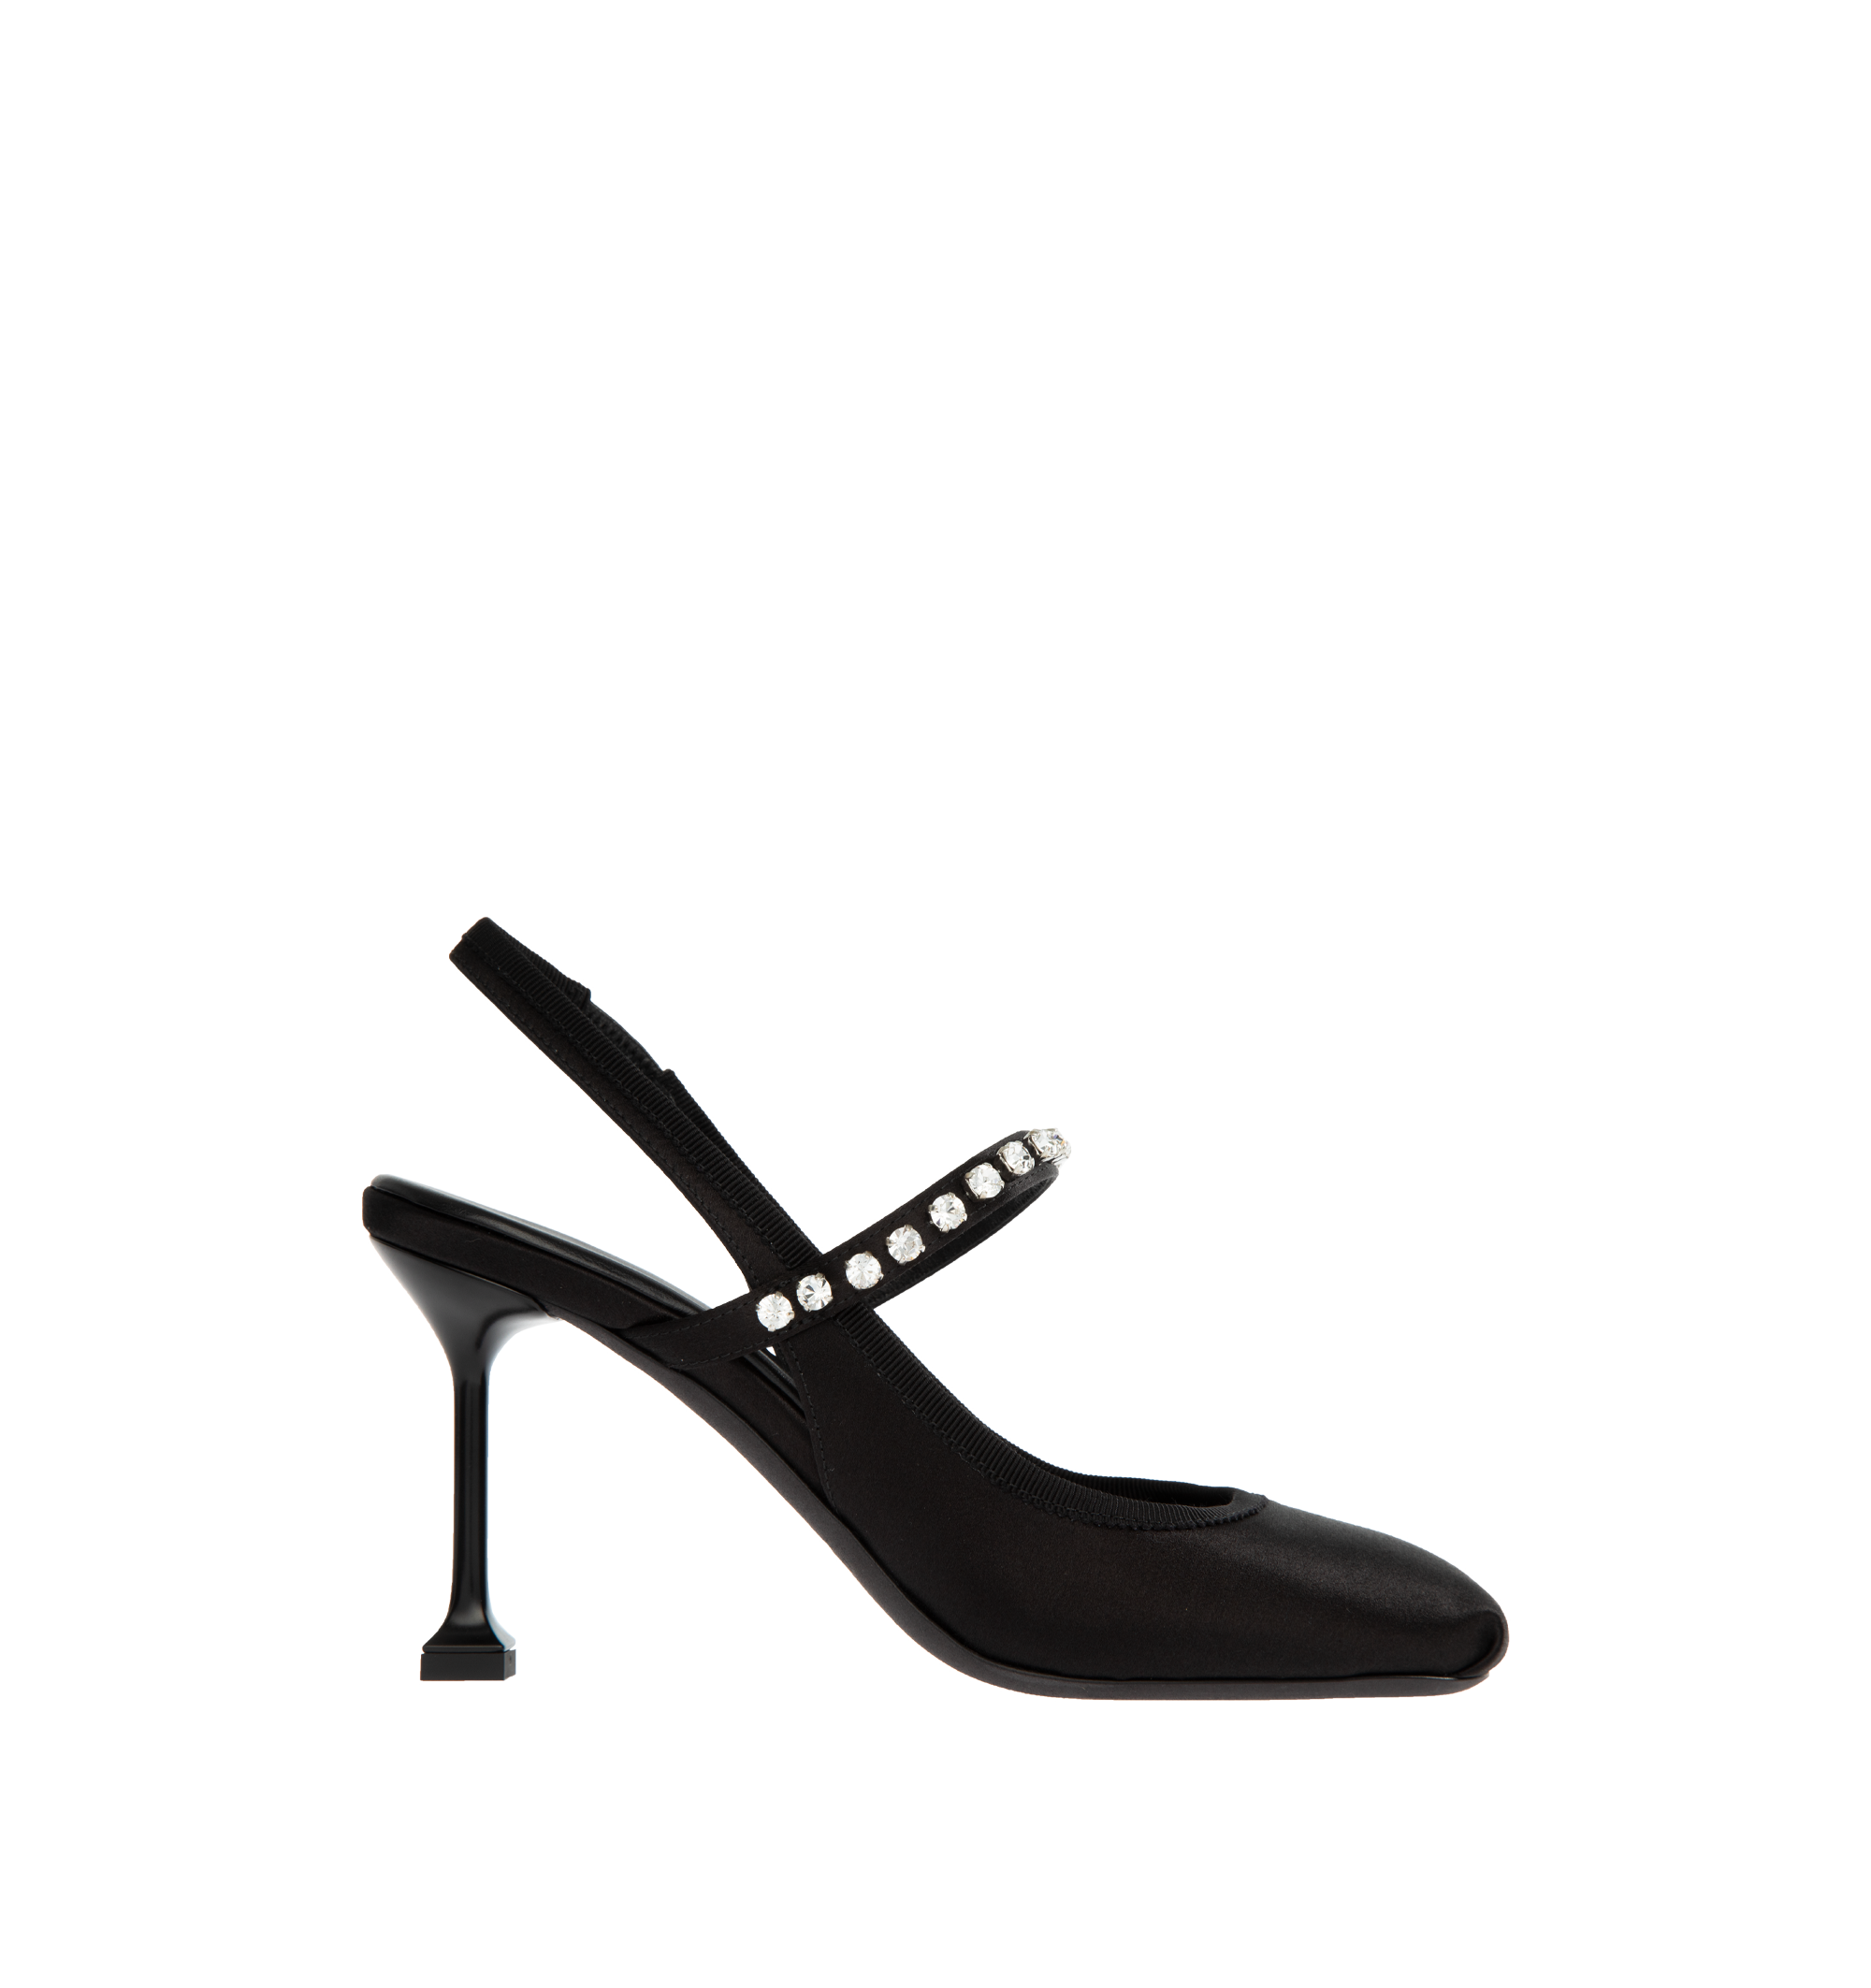 SATIN SLINGBACK PUMPS WITH CRYSTALS – HIRSHLEIFERS